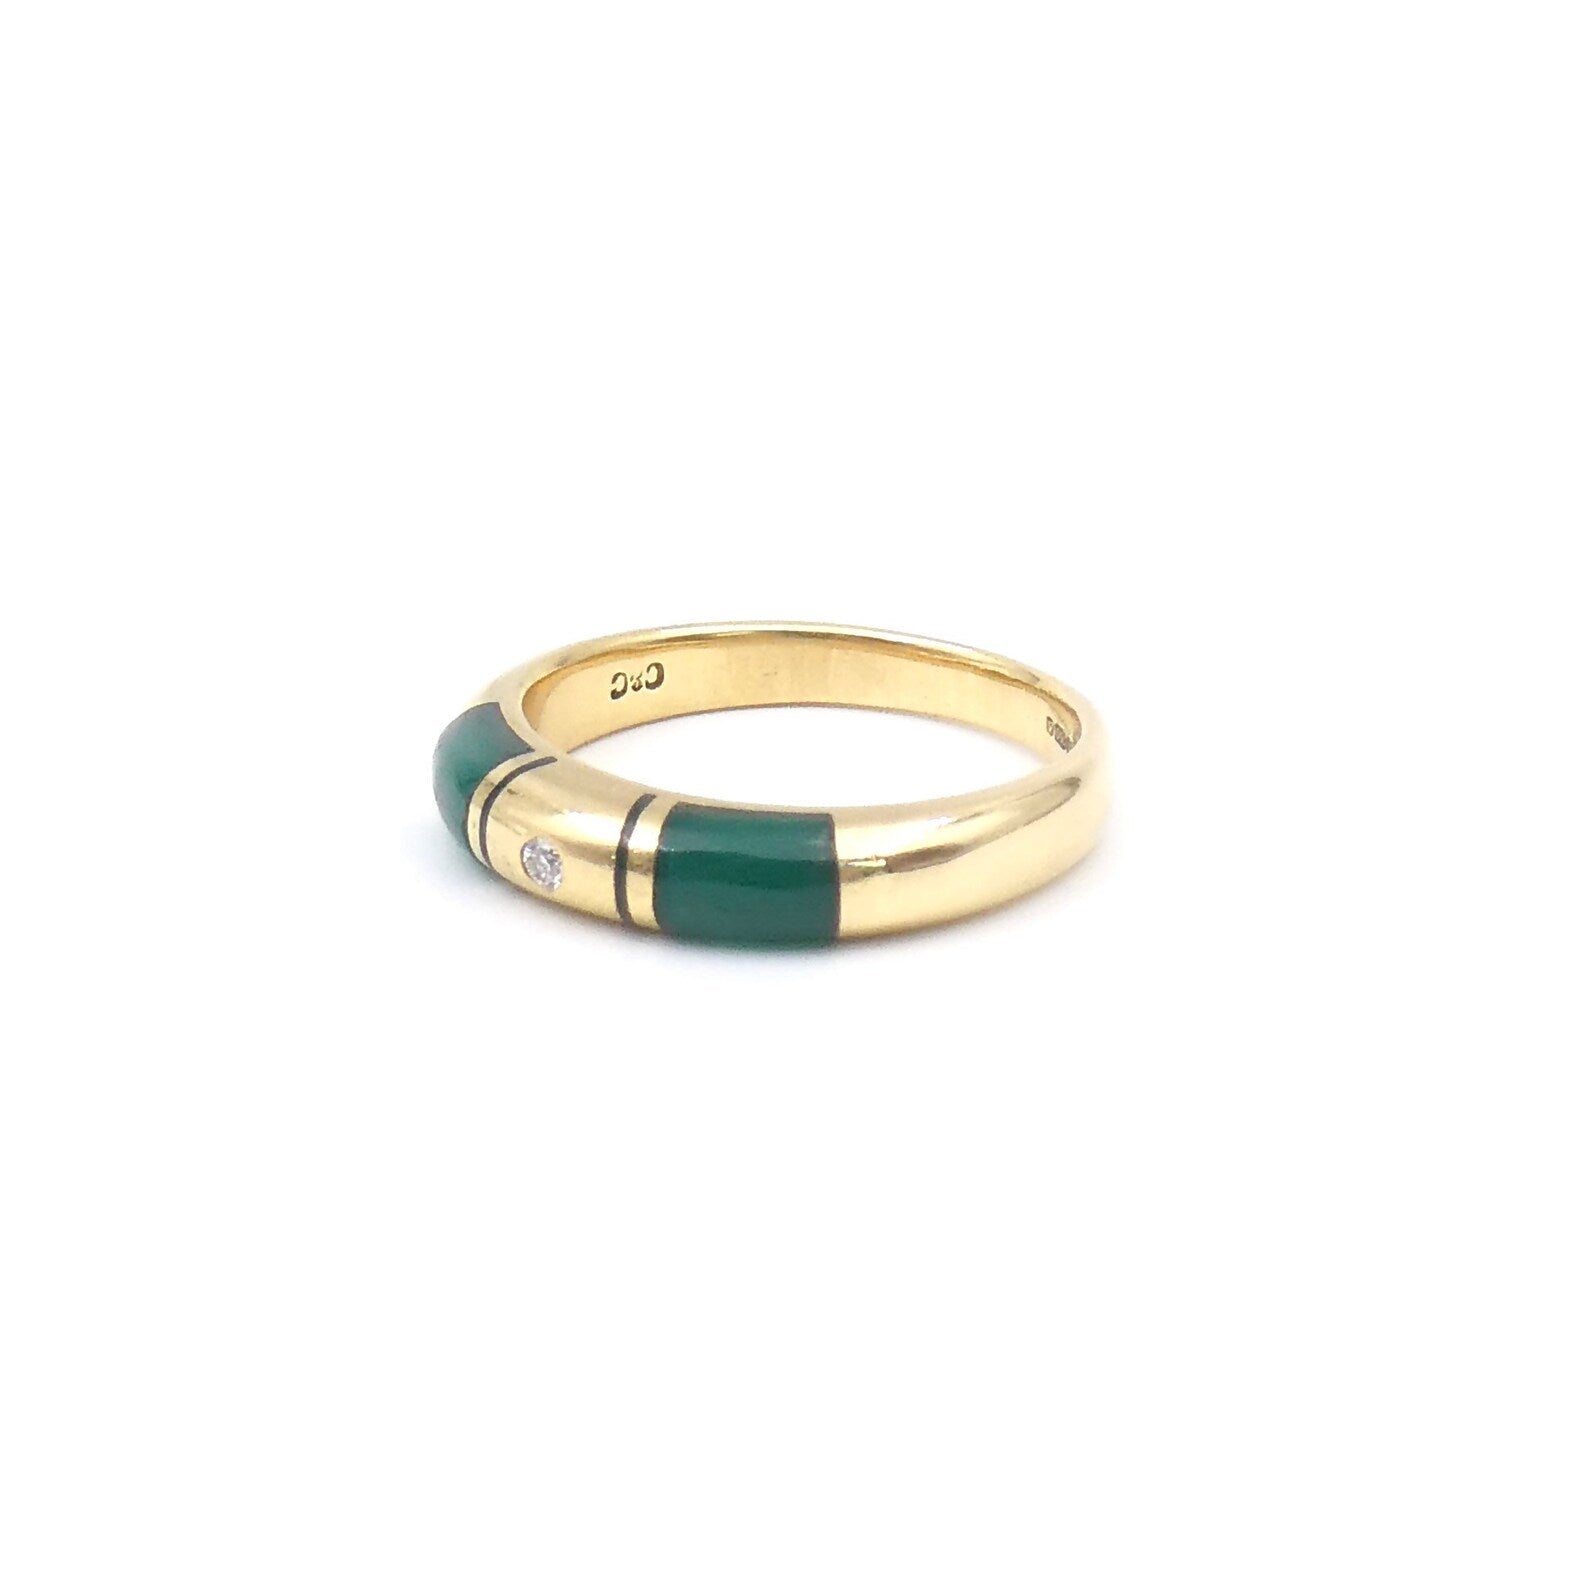 An 18kt gold band with an inlay of green aventurine set with a diamond. - Collected